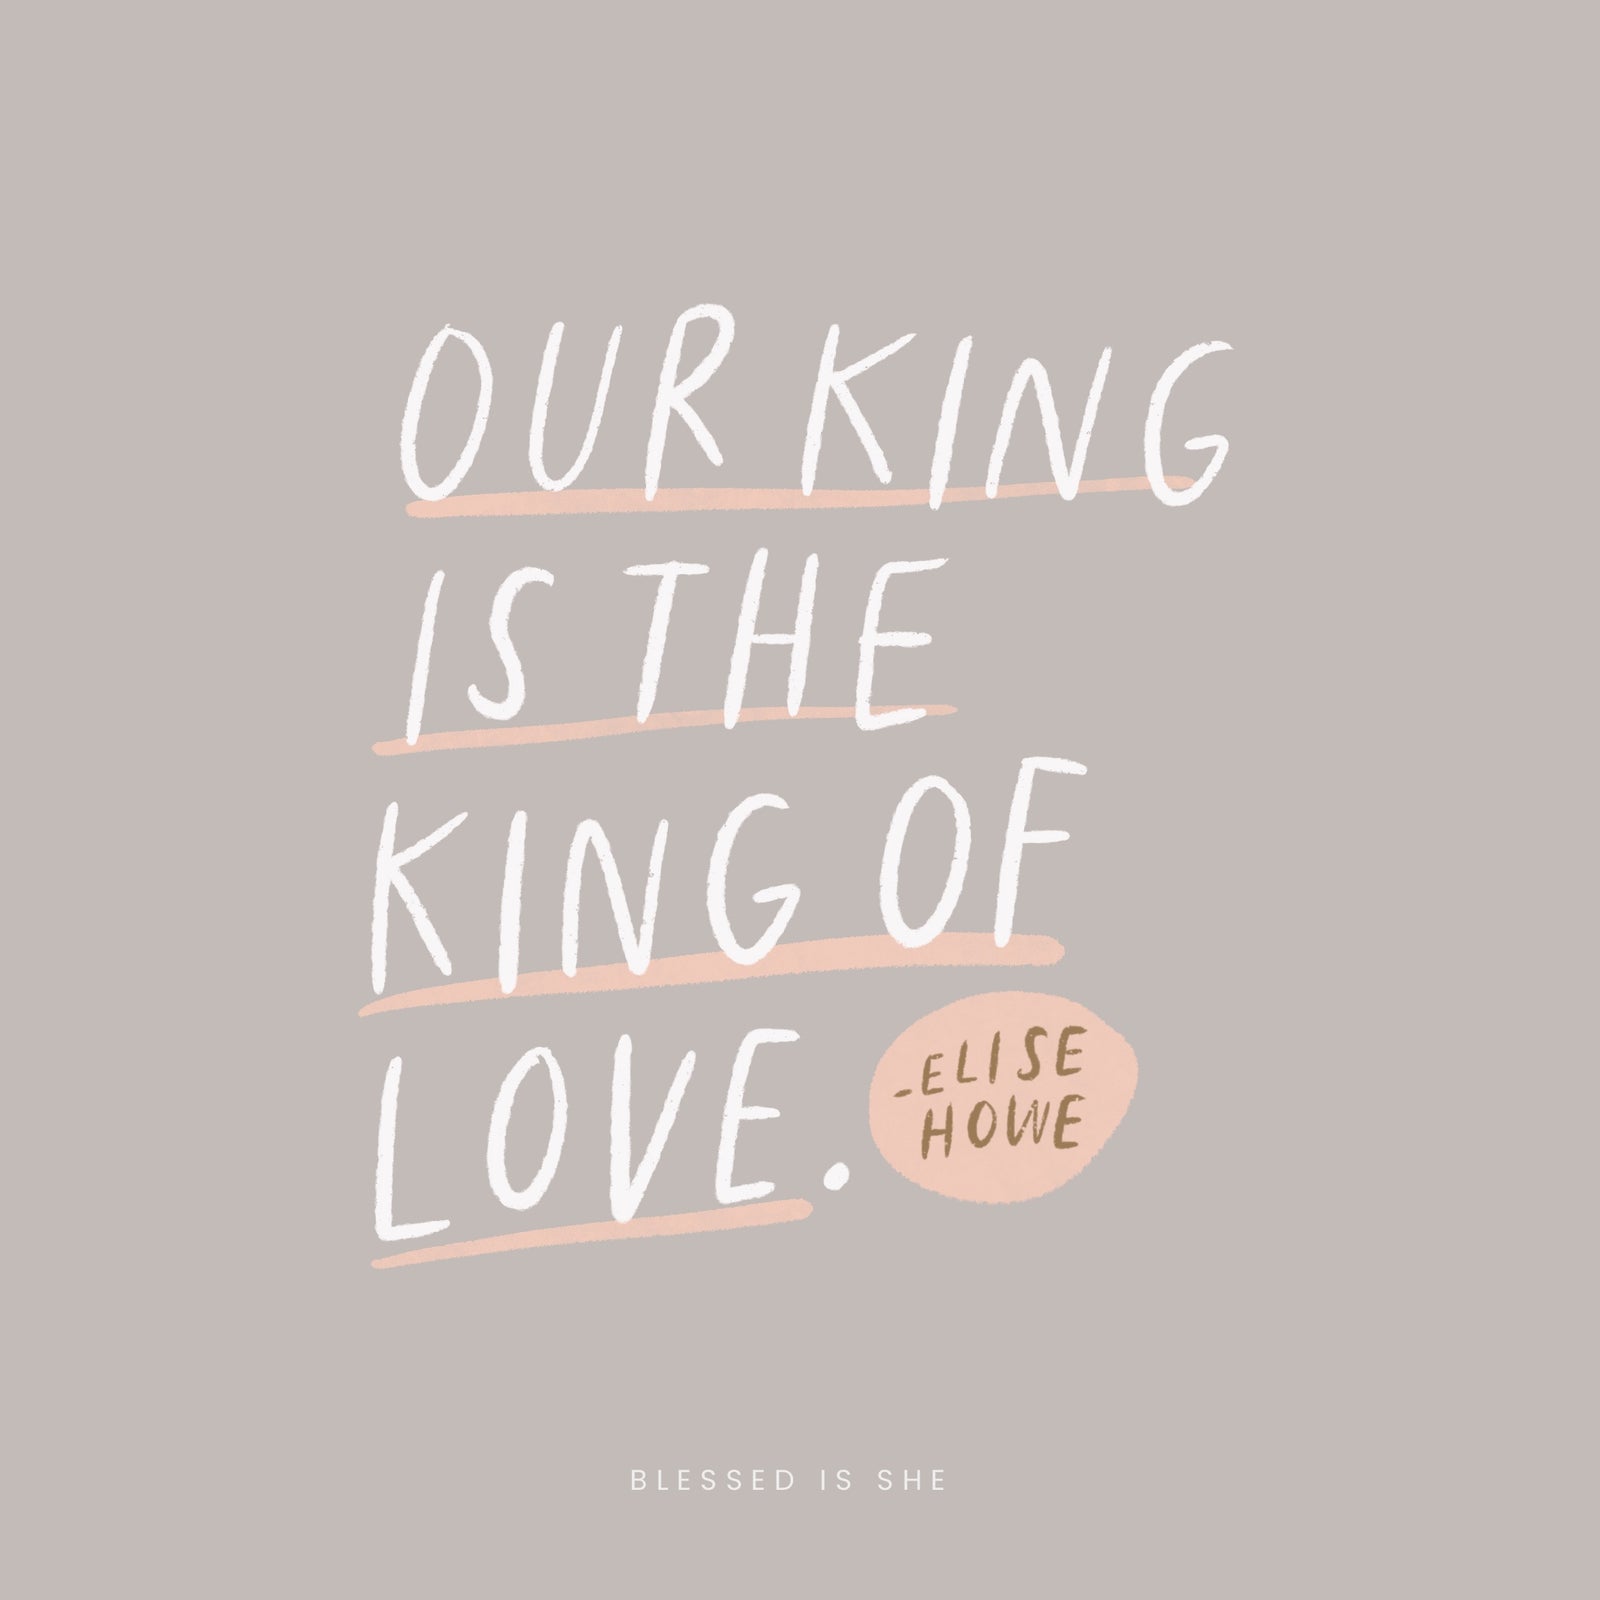 Abide on the Throne of My Heart